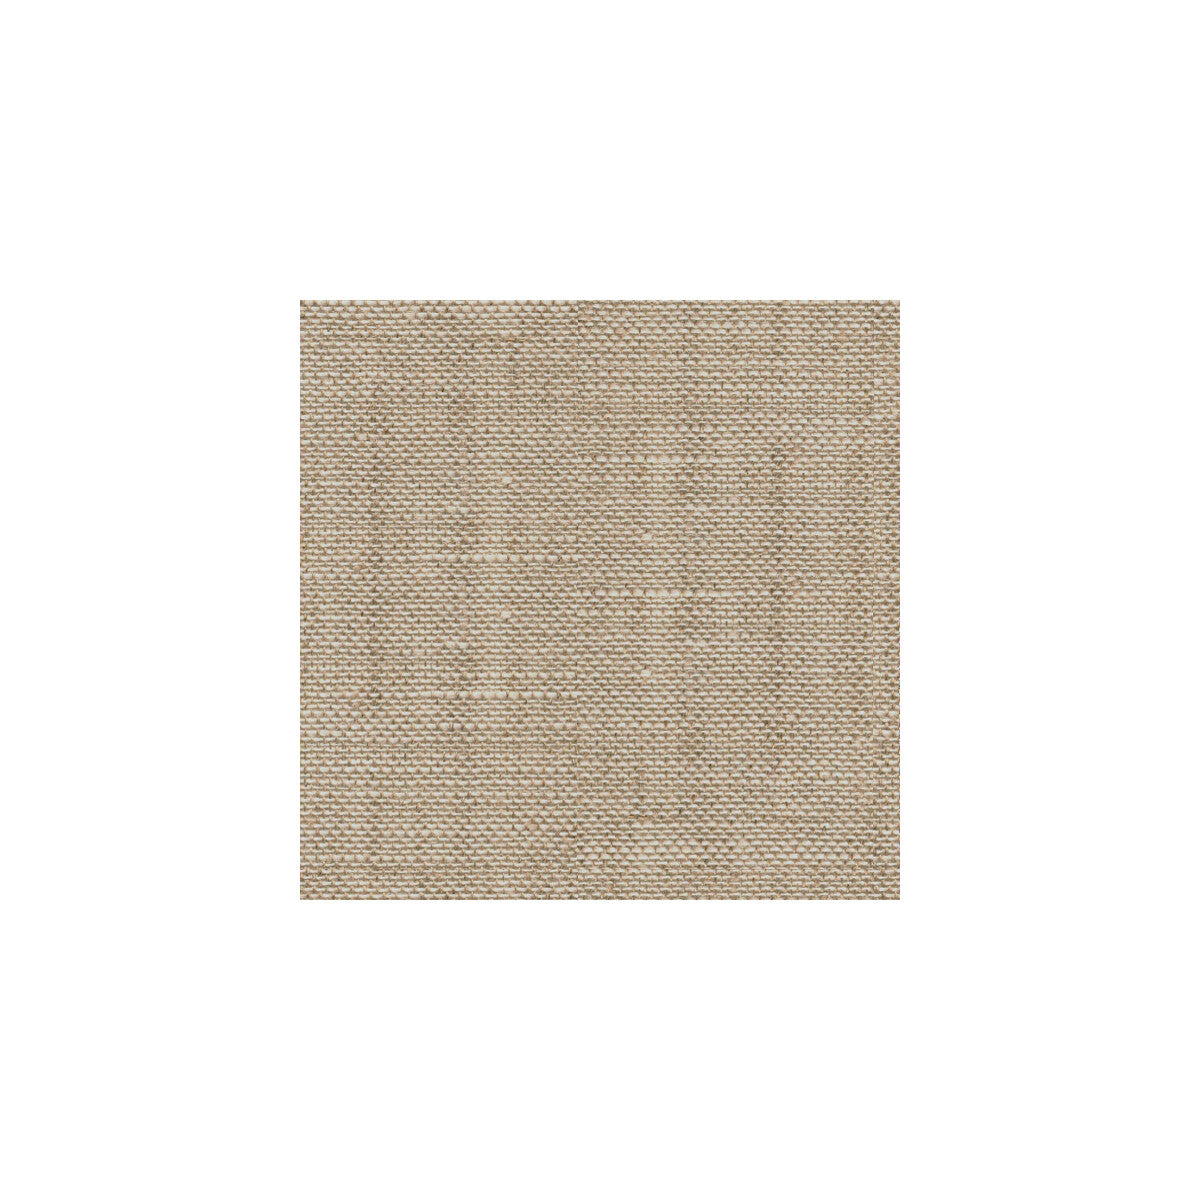 Lynette fabric in natural color - pattern 8014135.1116.0 - by Brunschwig &amp; Fils